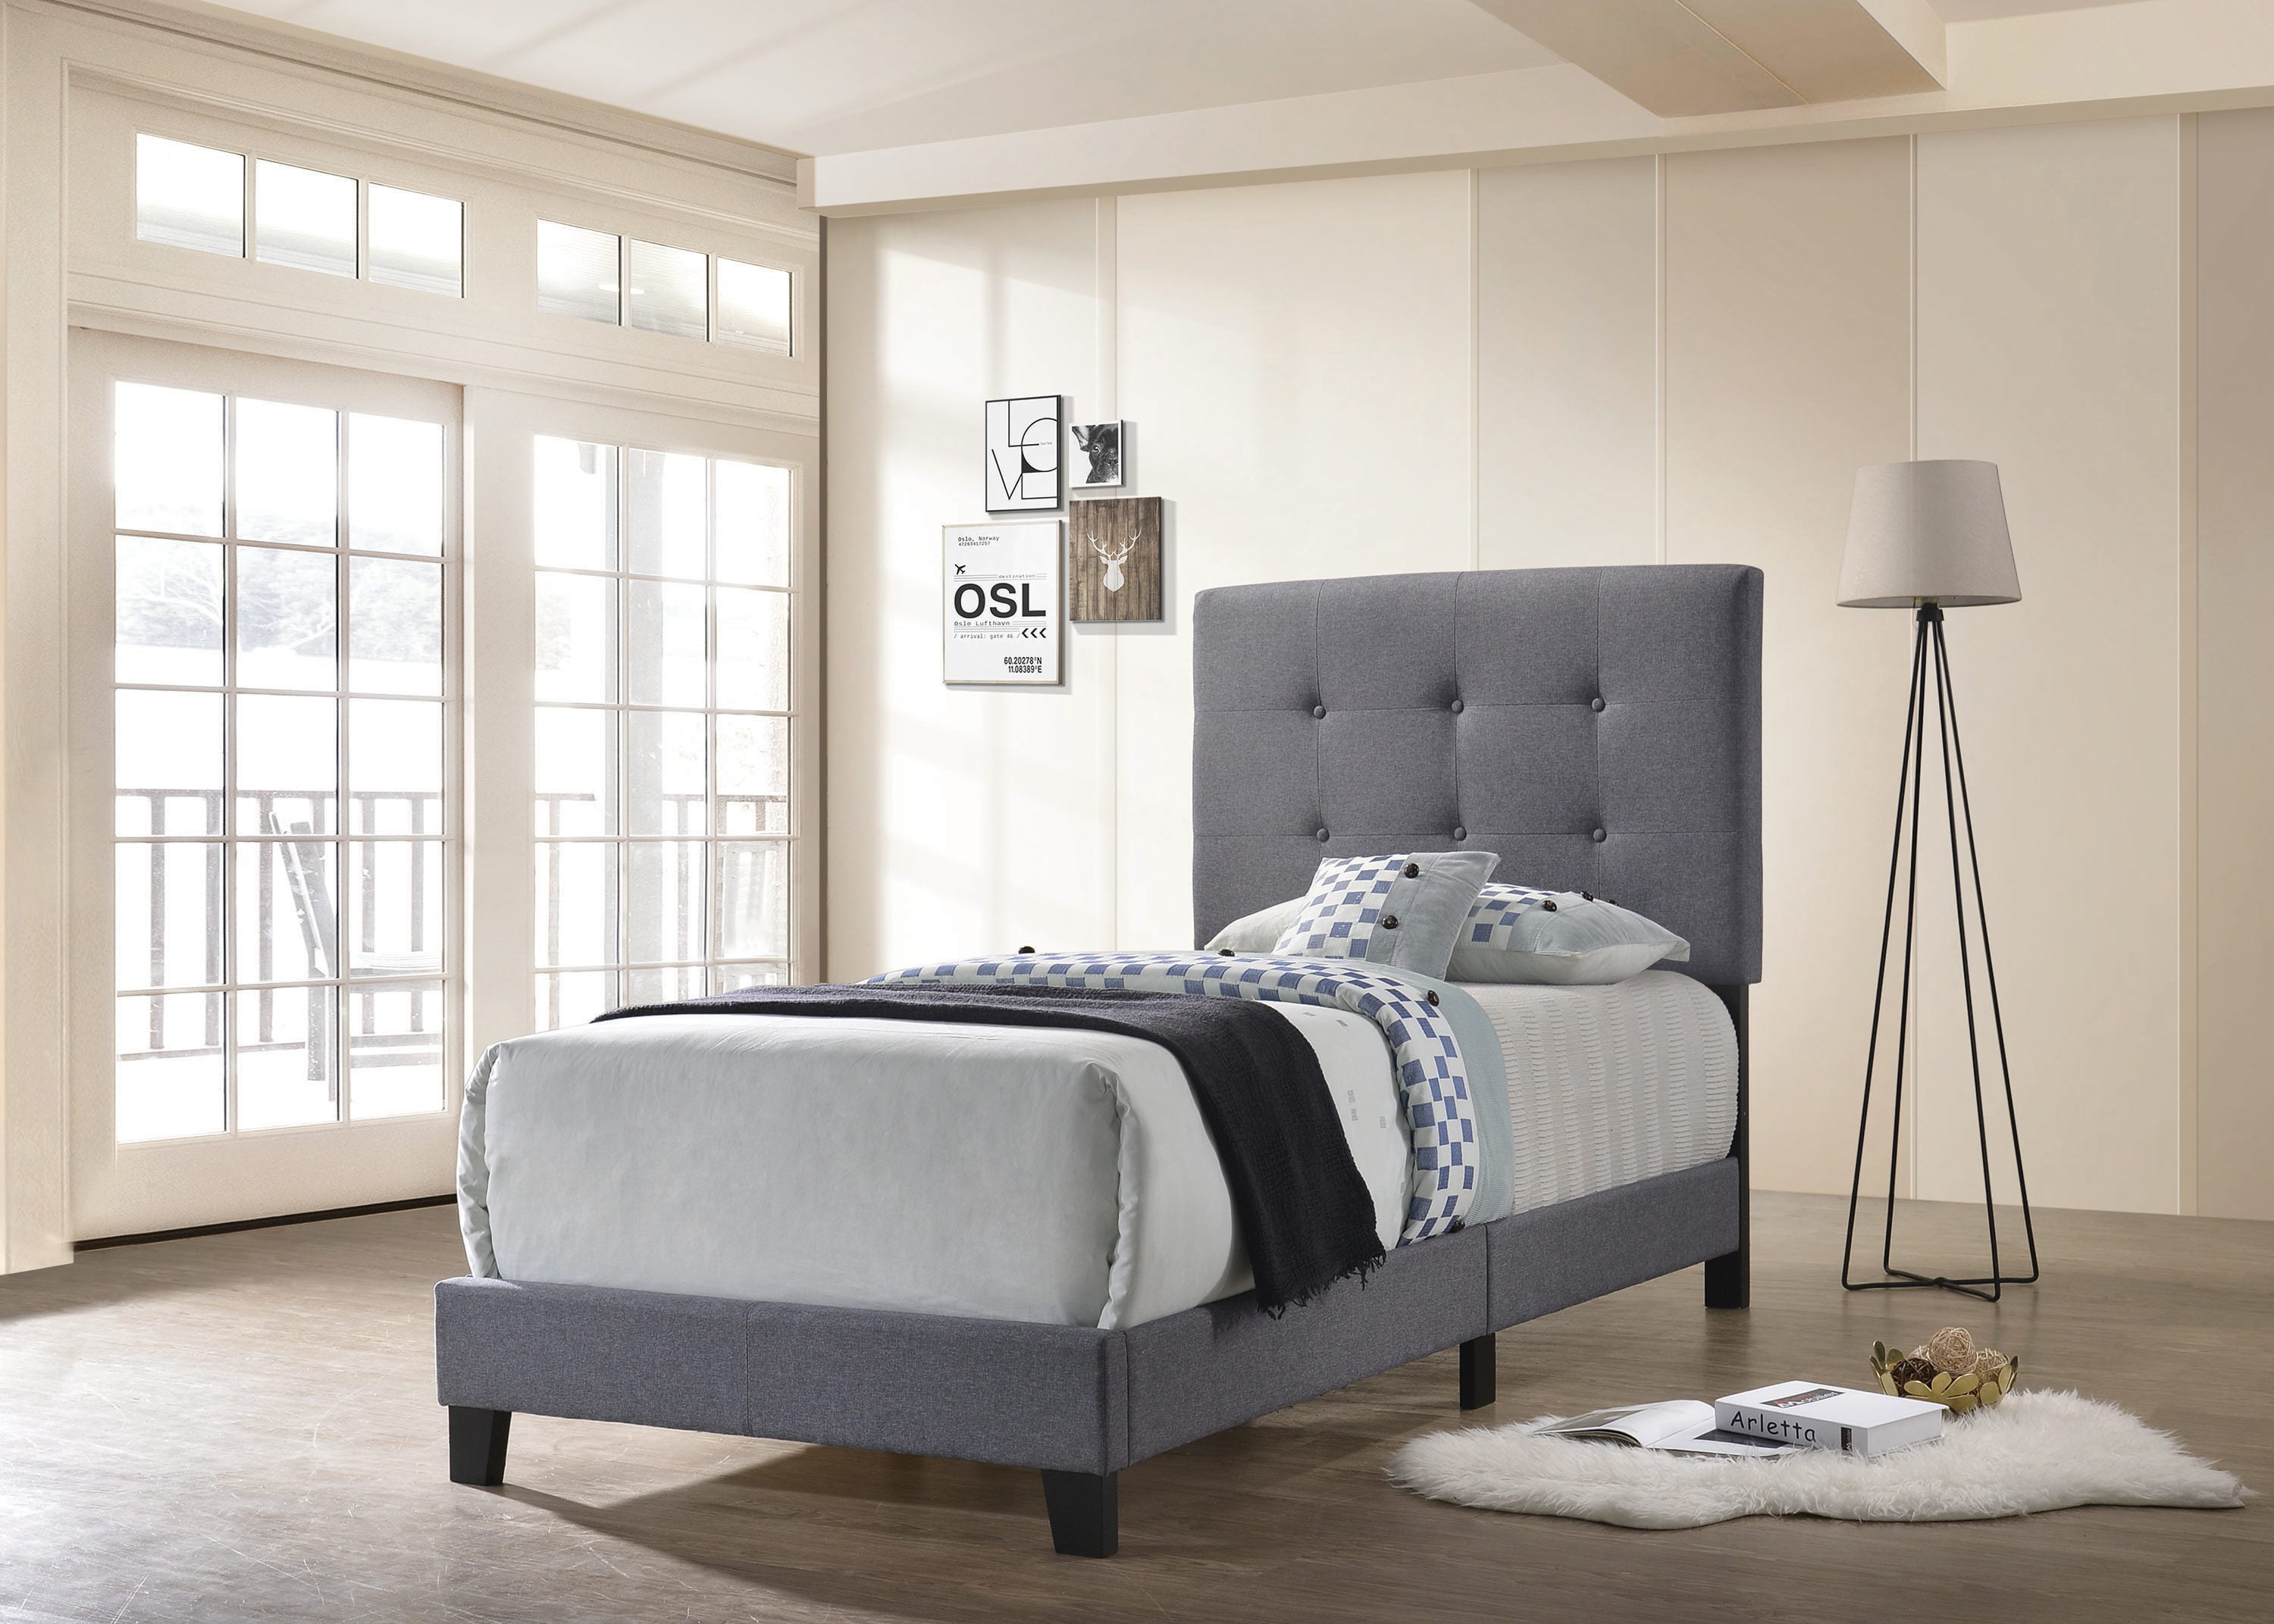 Mapes Tufted Upholstered Twin Bed Grey, Grey Twin Headboard With Studs